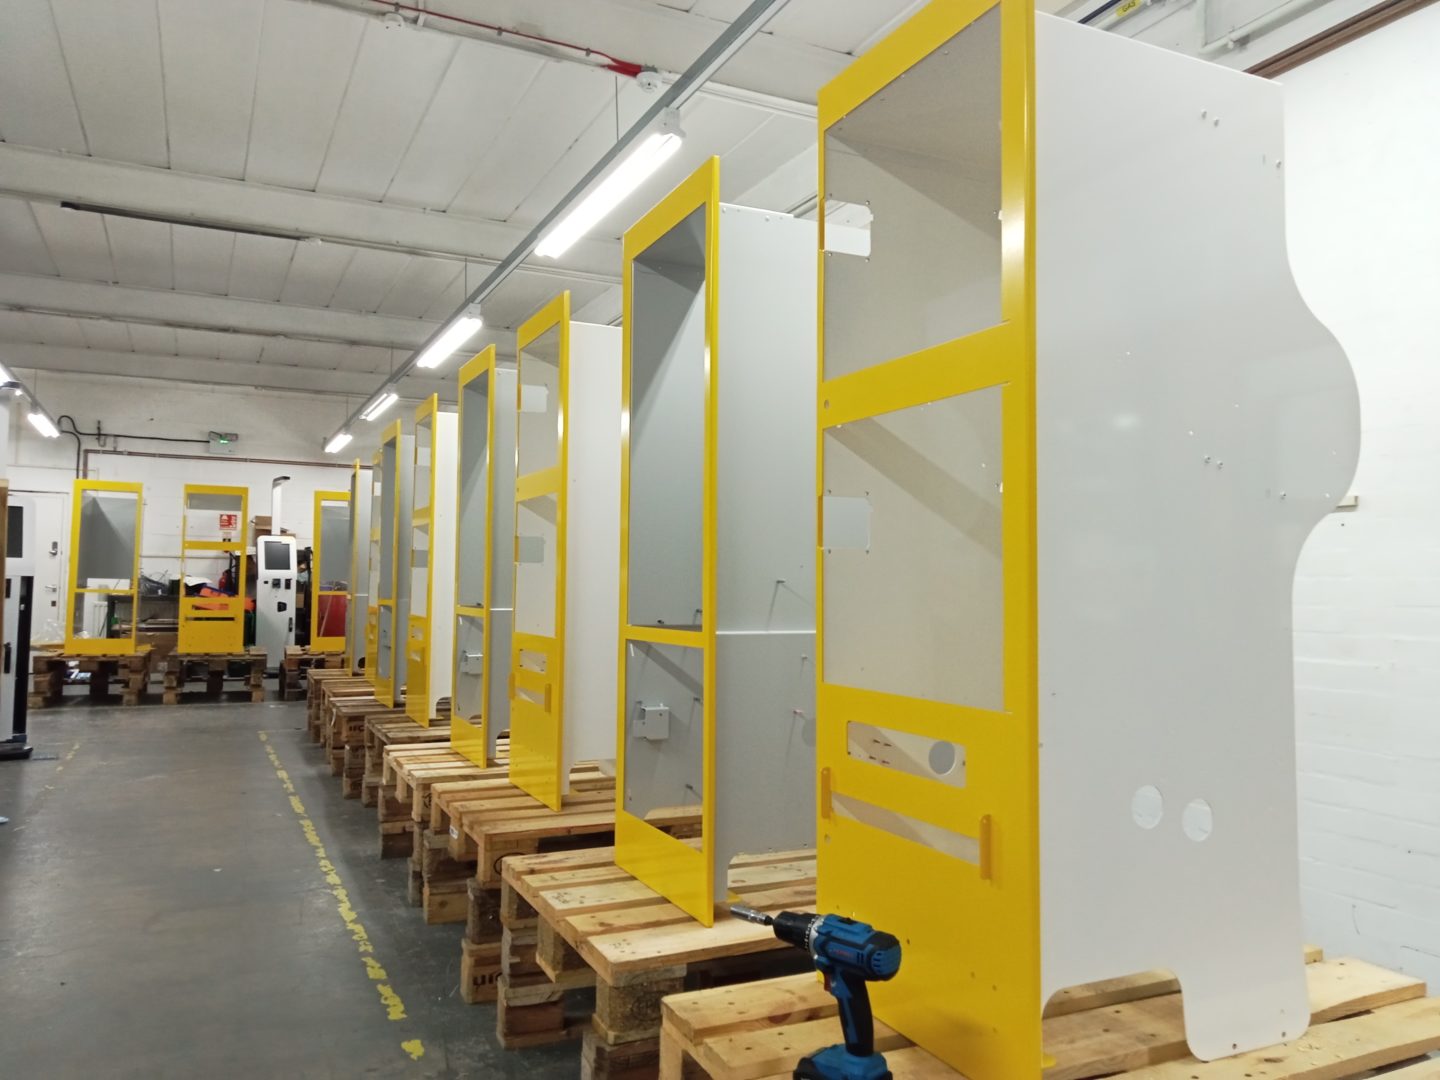 a row the smartest digital postal wall mounted kiosk being manufactured in the UK